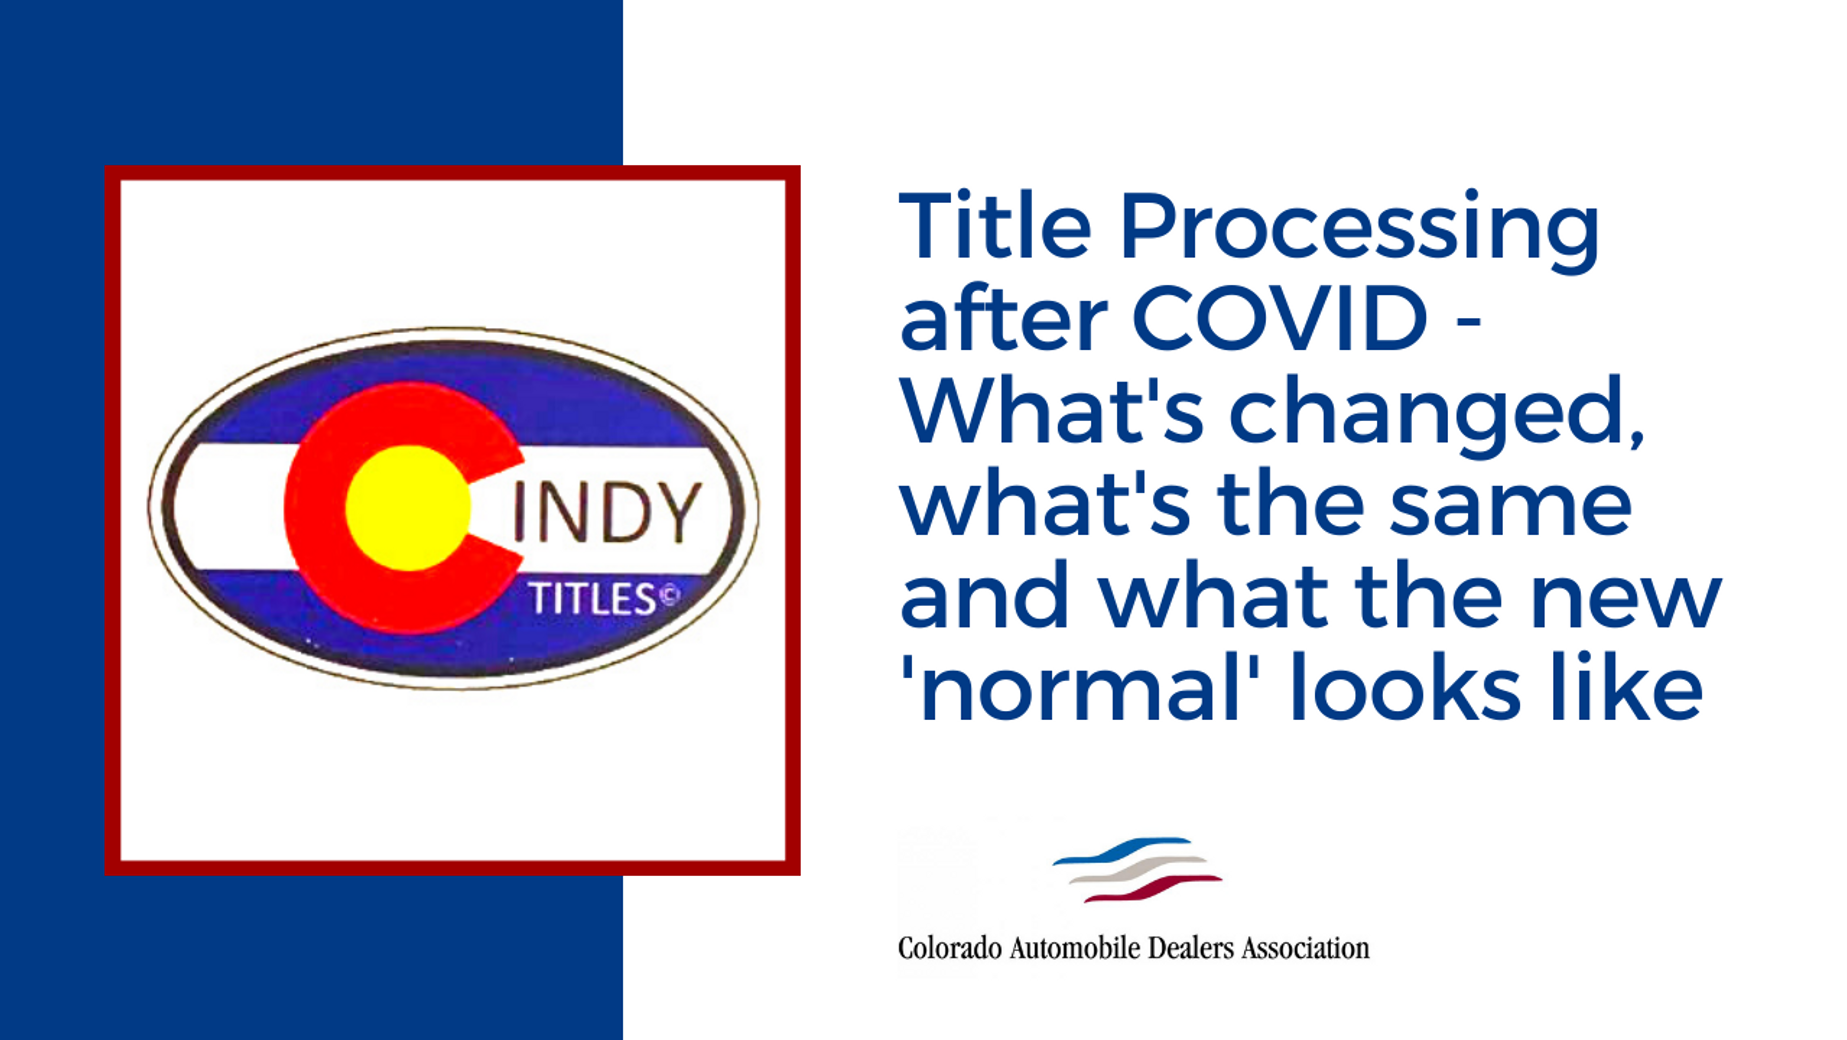 Title Processing after COVID - What's changed, what's the same and what the new 'normal' looks like